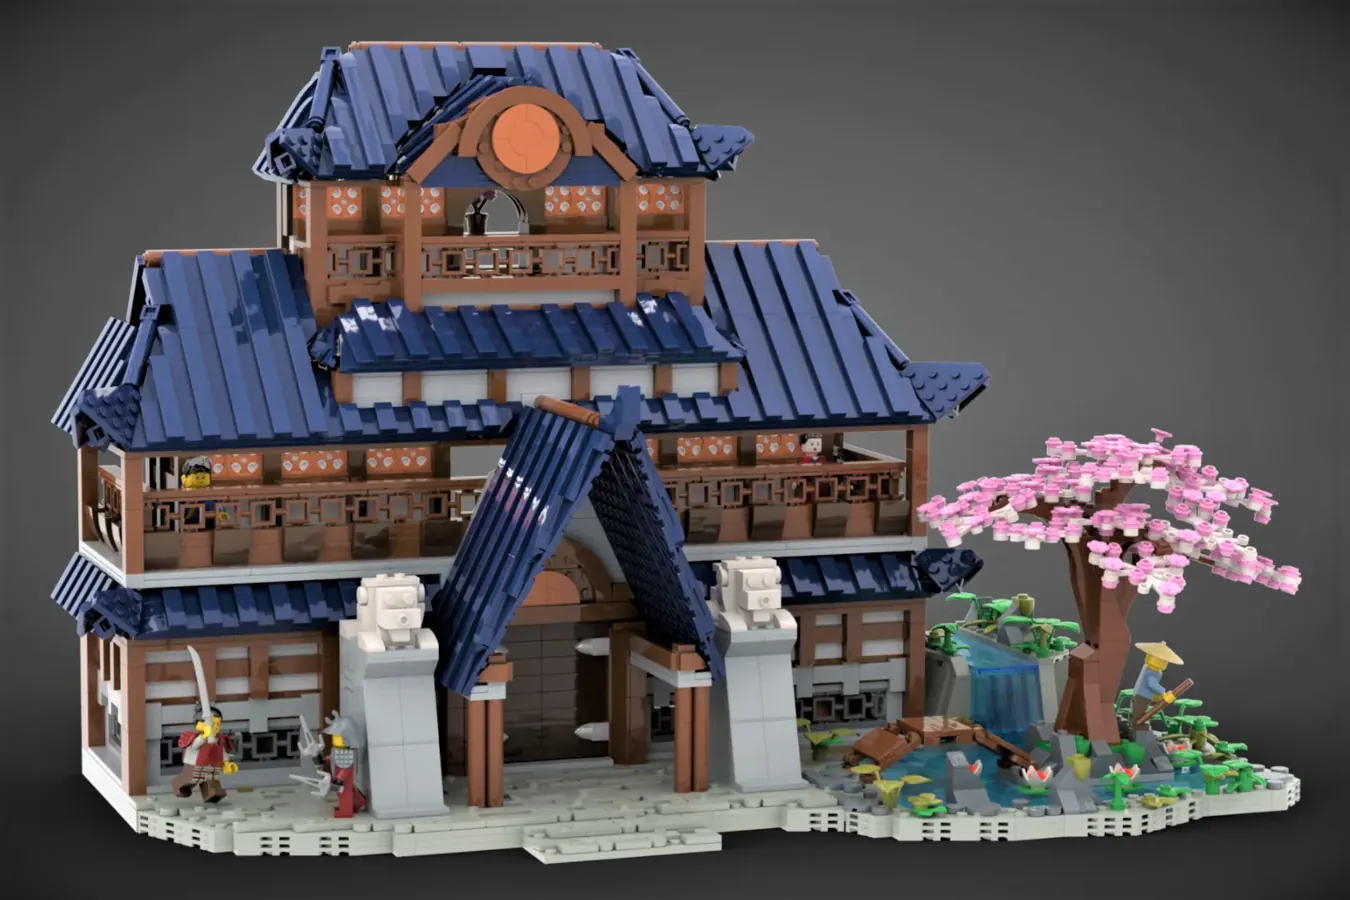 Lego (R) ideas for a Japanese castle ] has entered the product review!Introducing the 3rd 10,000 support design in 2022